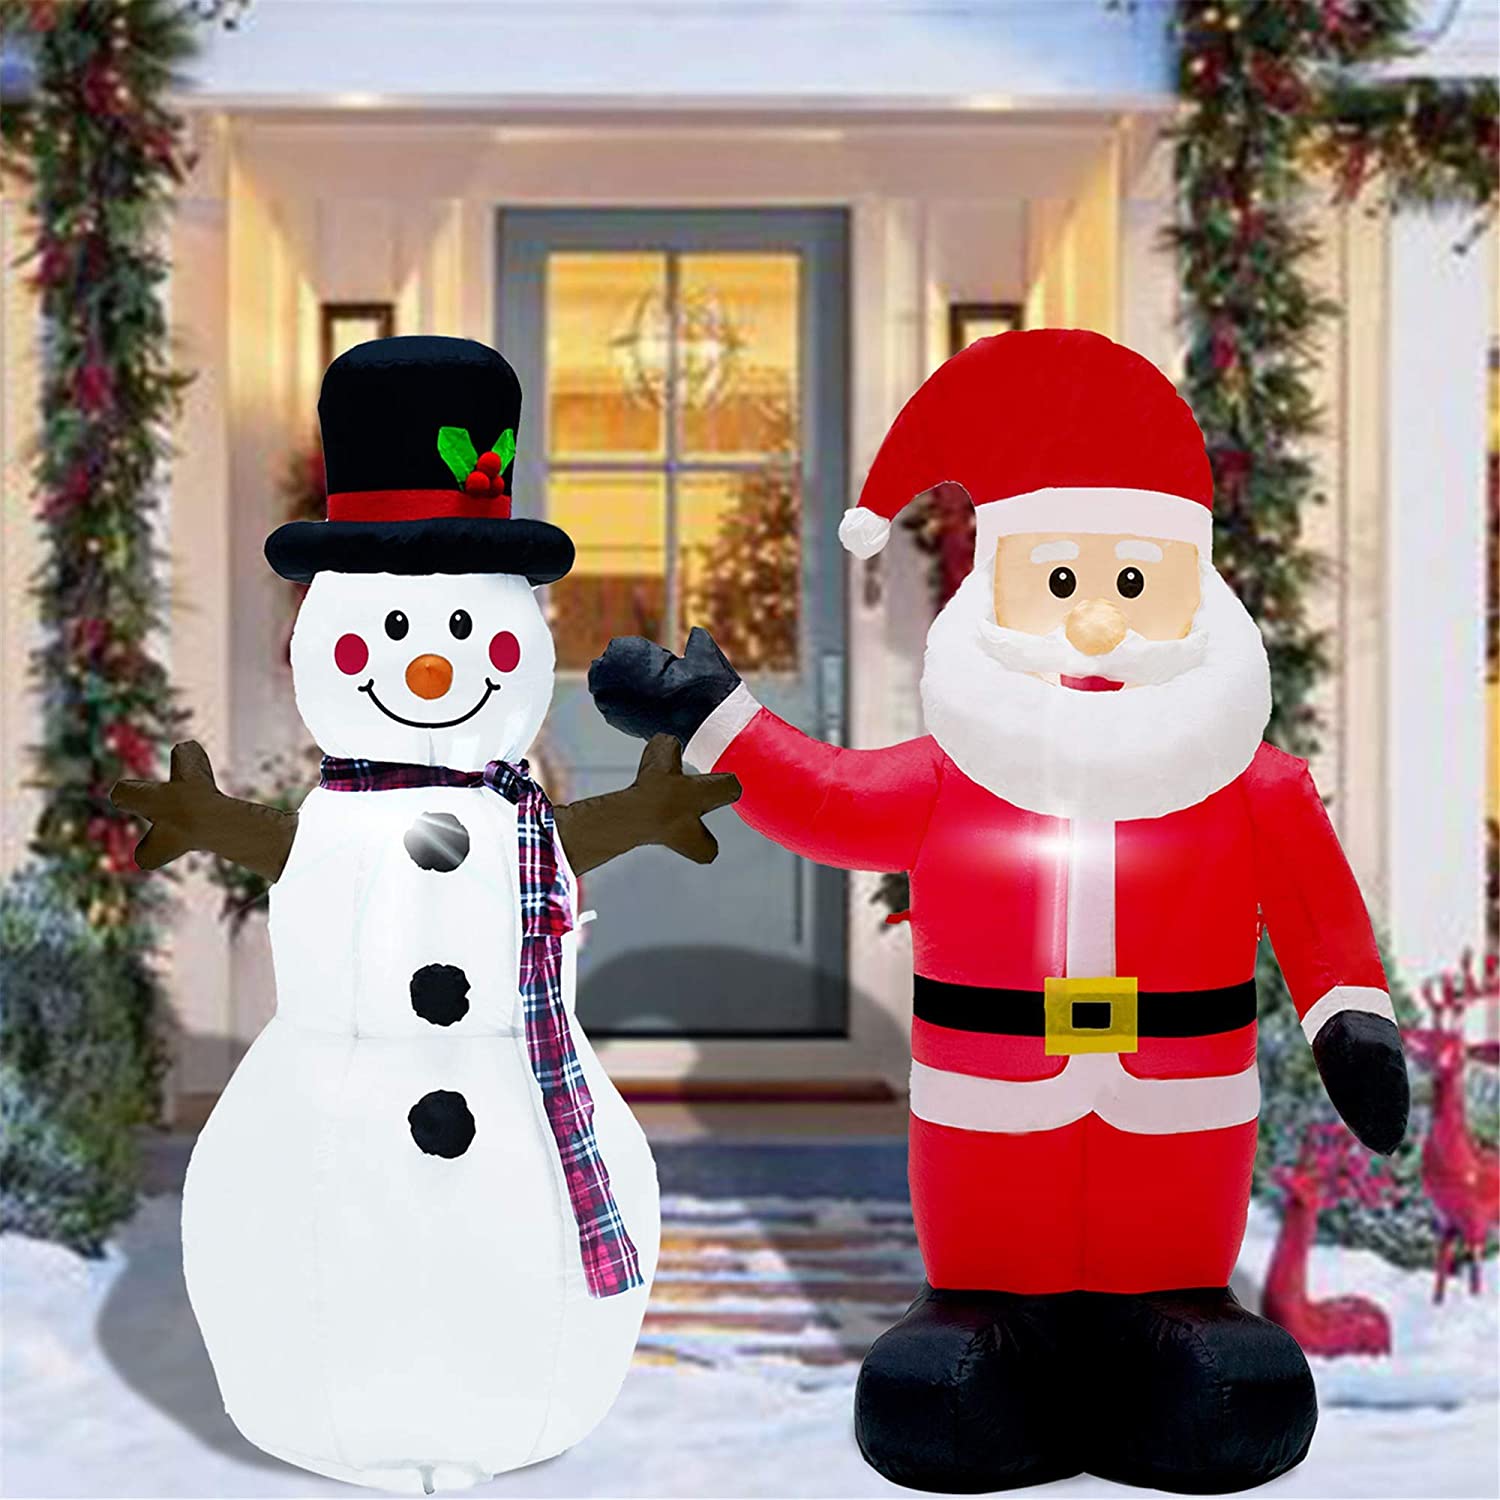 GOOSH Inflatable Snowman Outdoor Christmas Decoration, 5-Foot